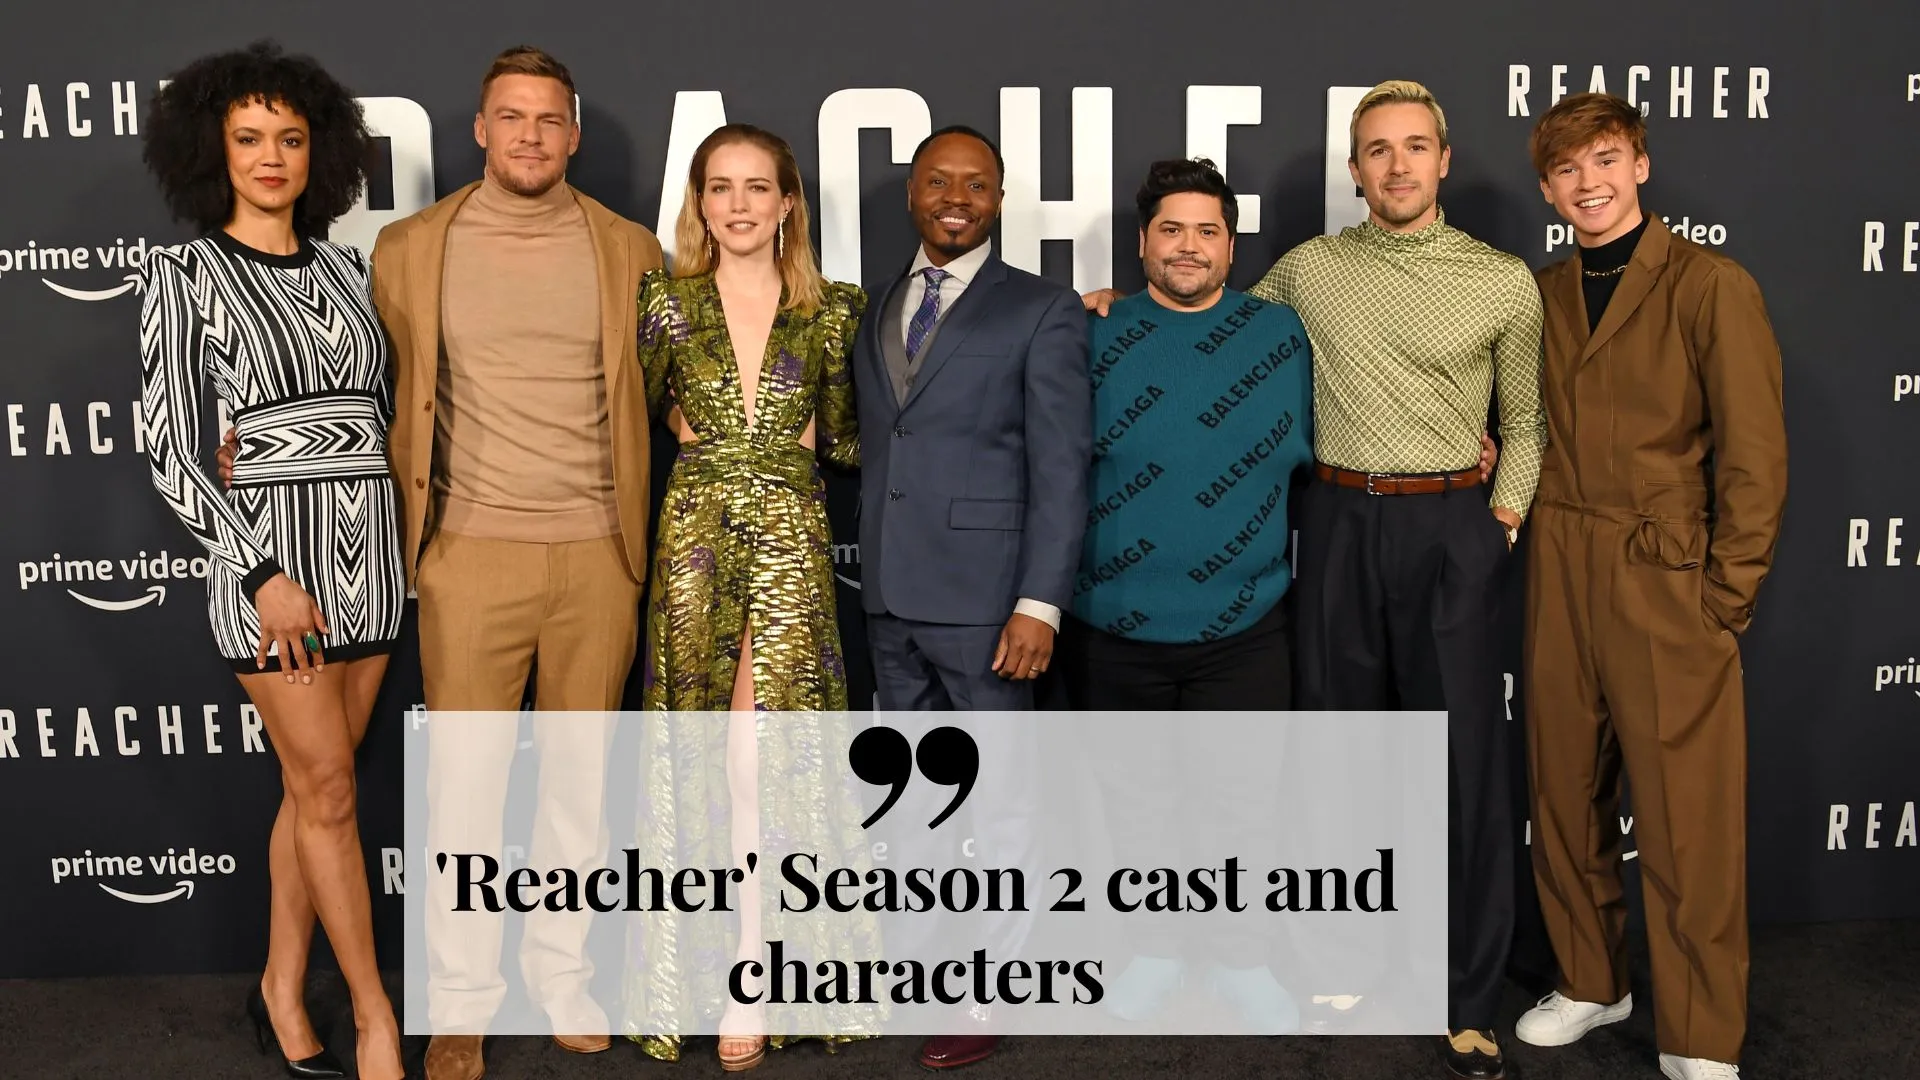 'Reacher' Season 2 cast and characters